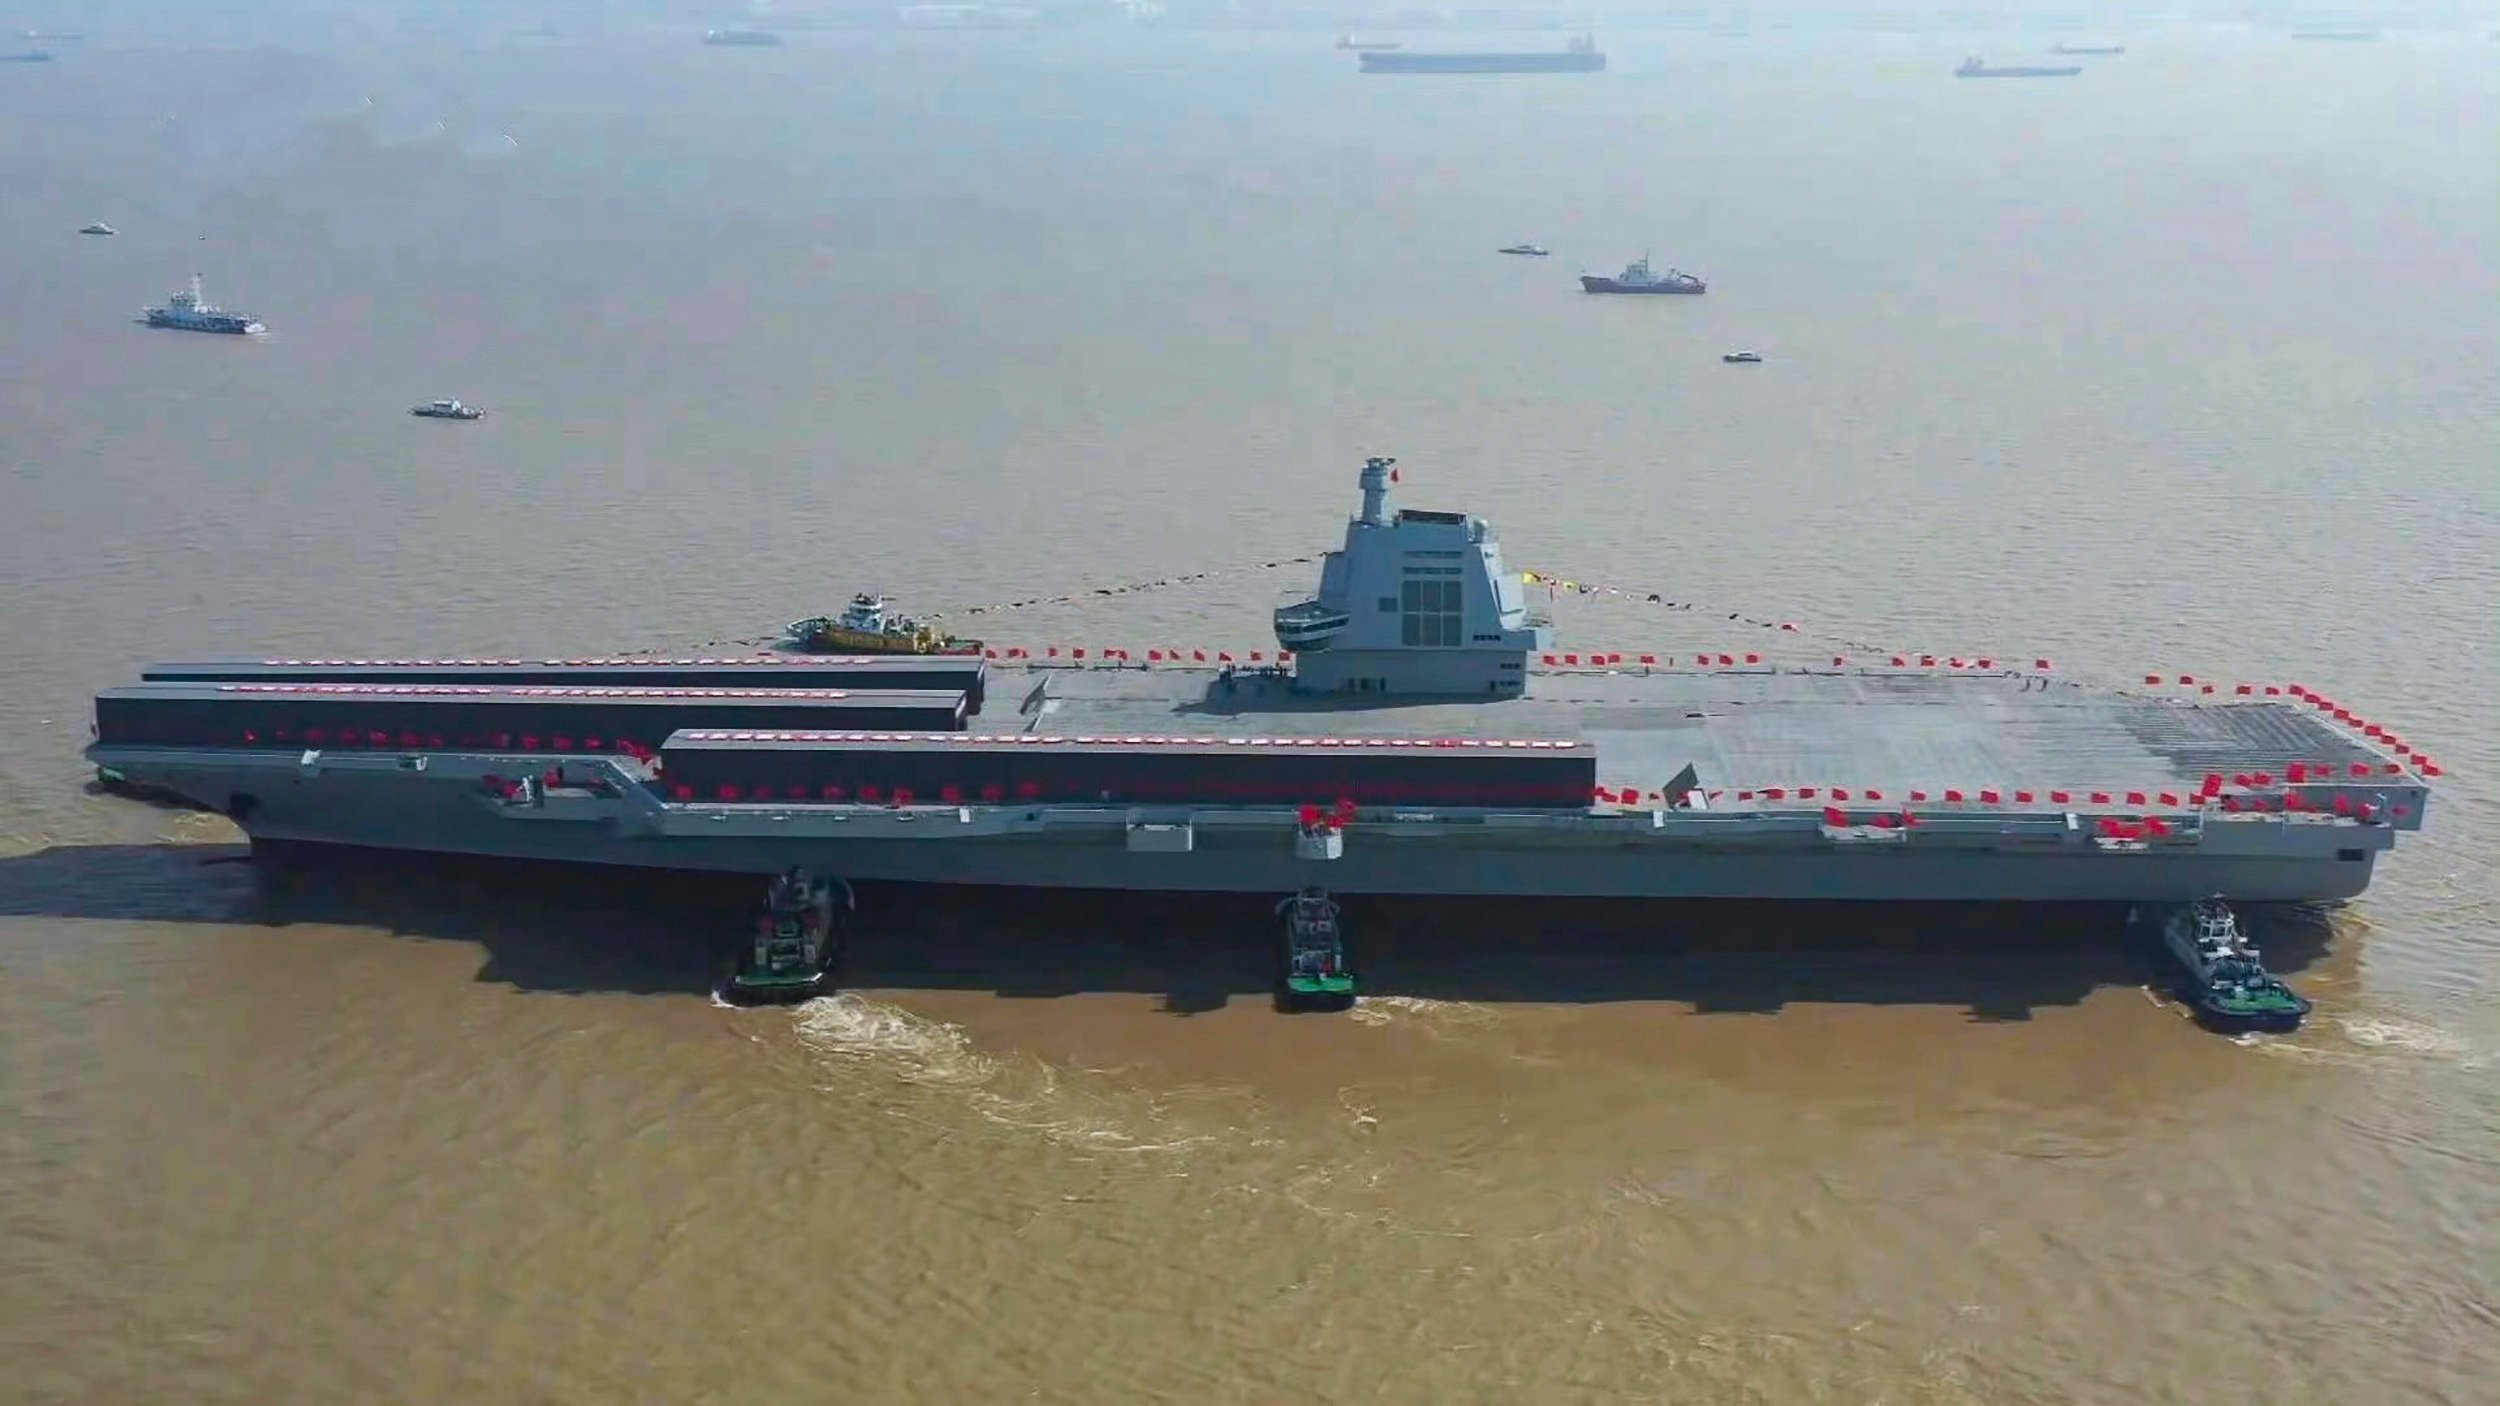 Mooring trials have started for China’s third aircraft carrier, the Fujian. Photo: Weibo